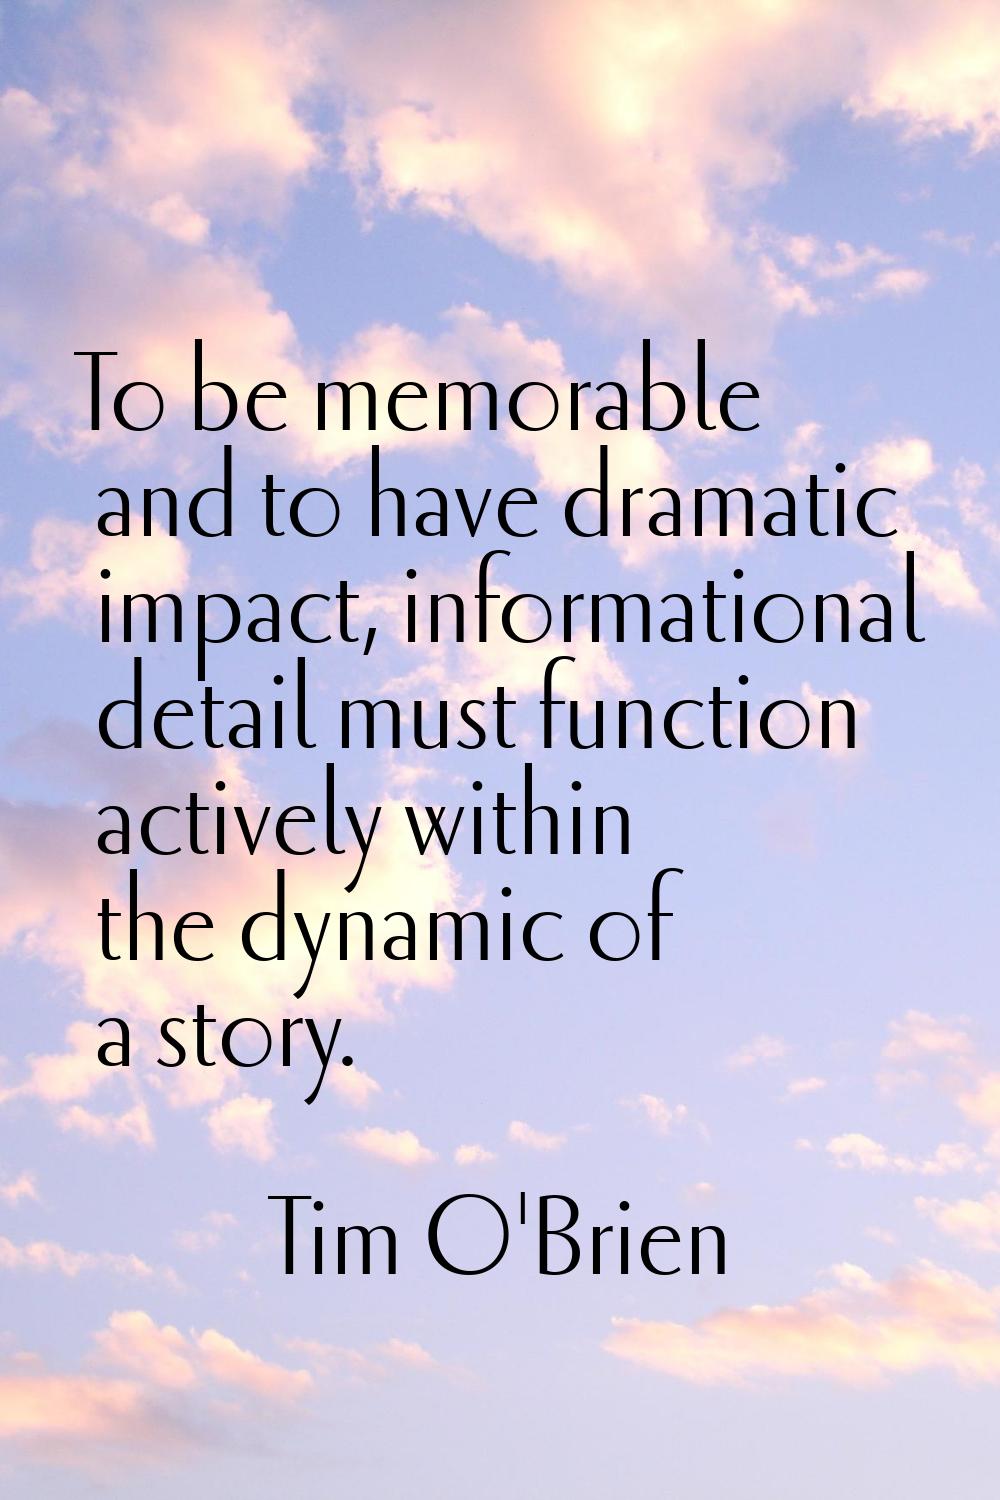 To be memorable and to have dramatic impact, informational detail must function actively within the